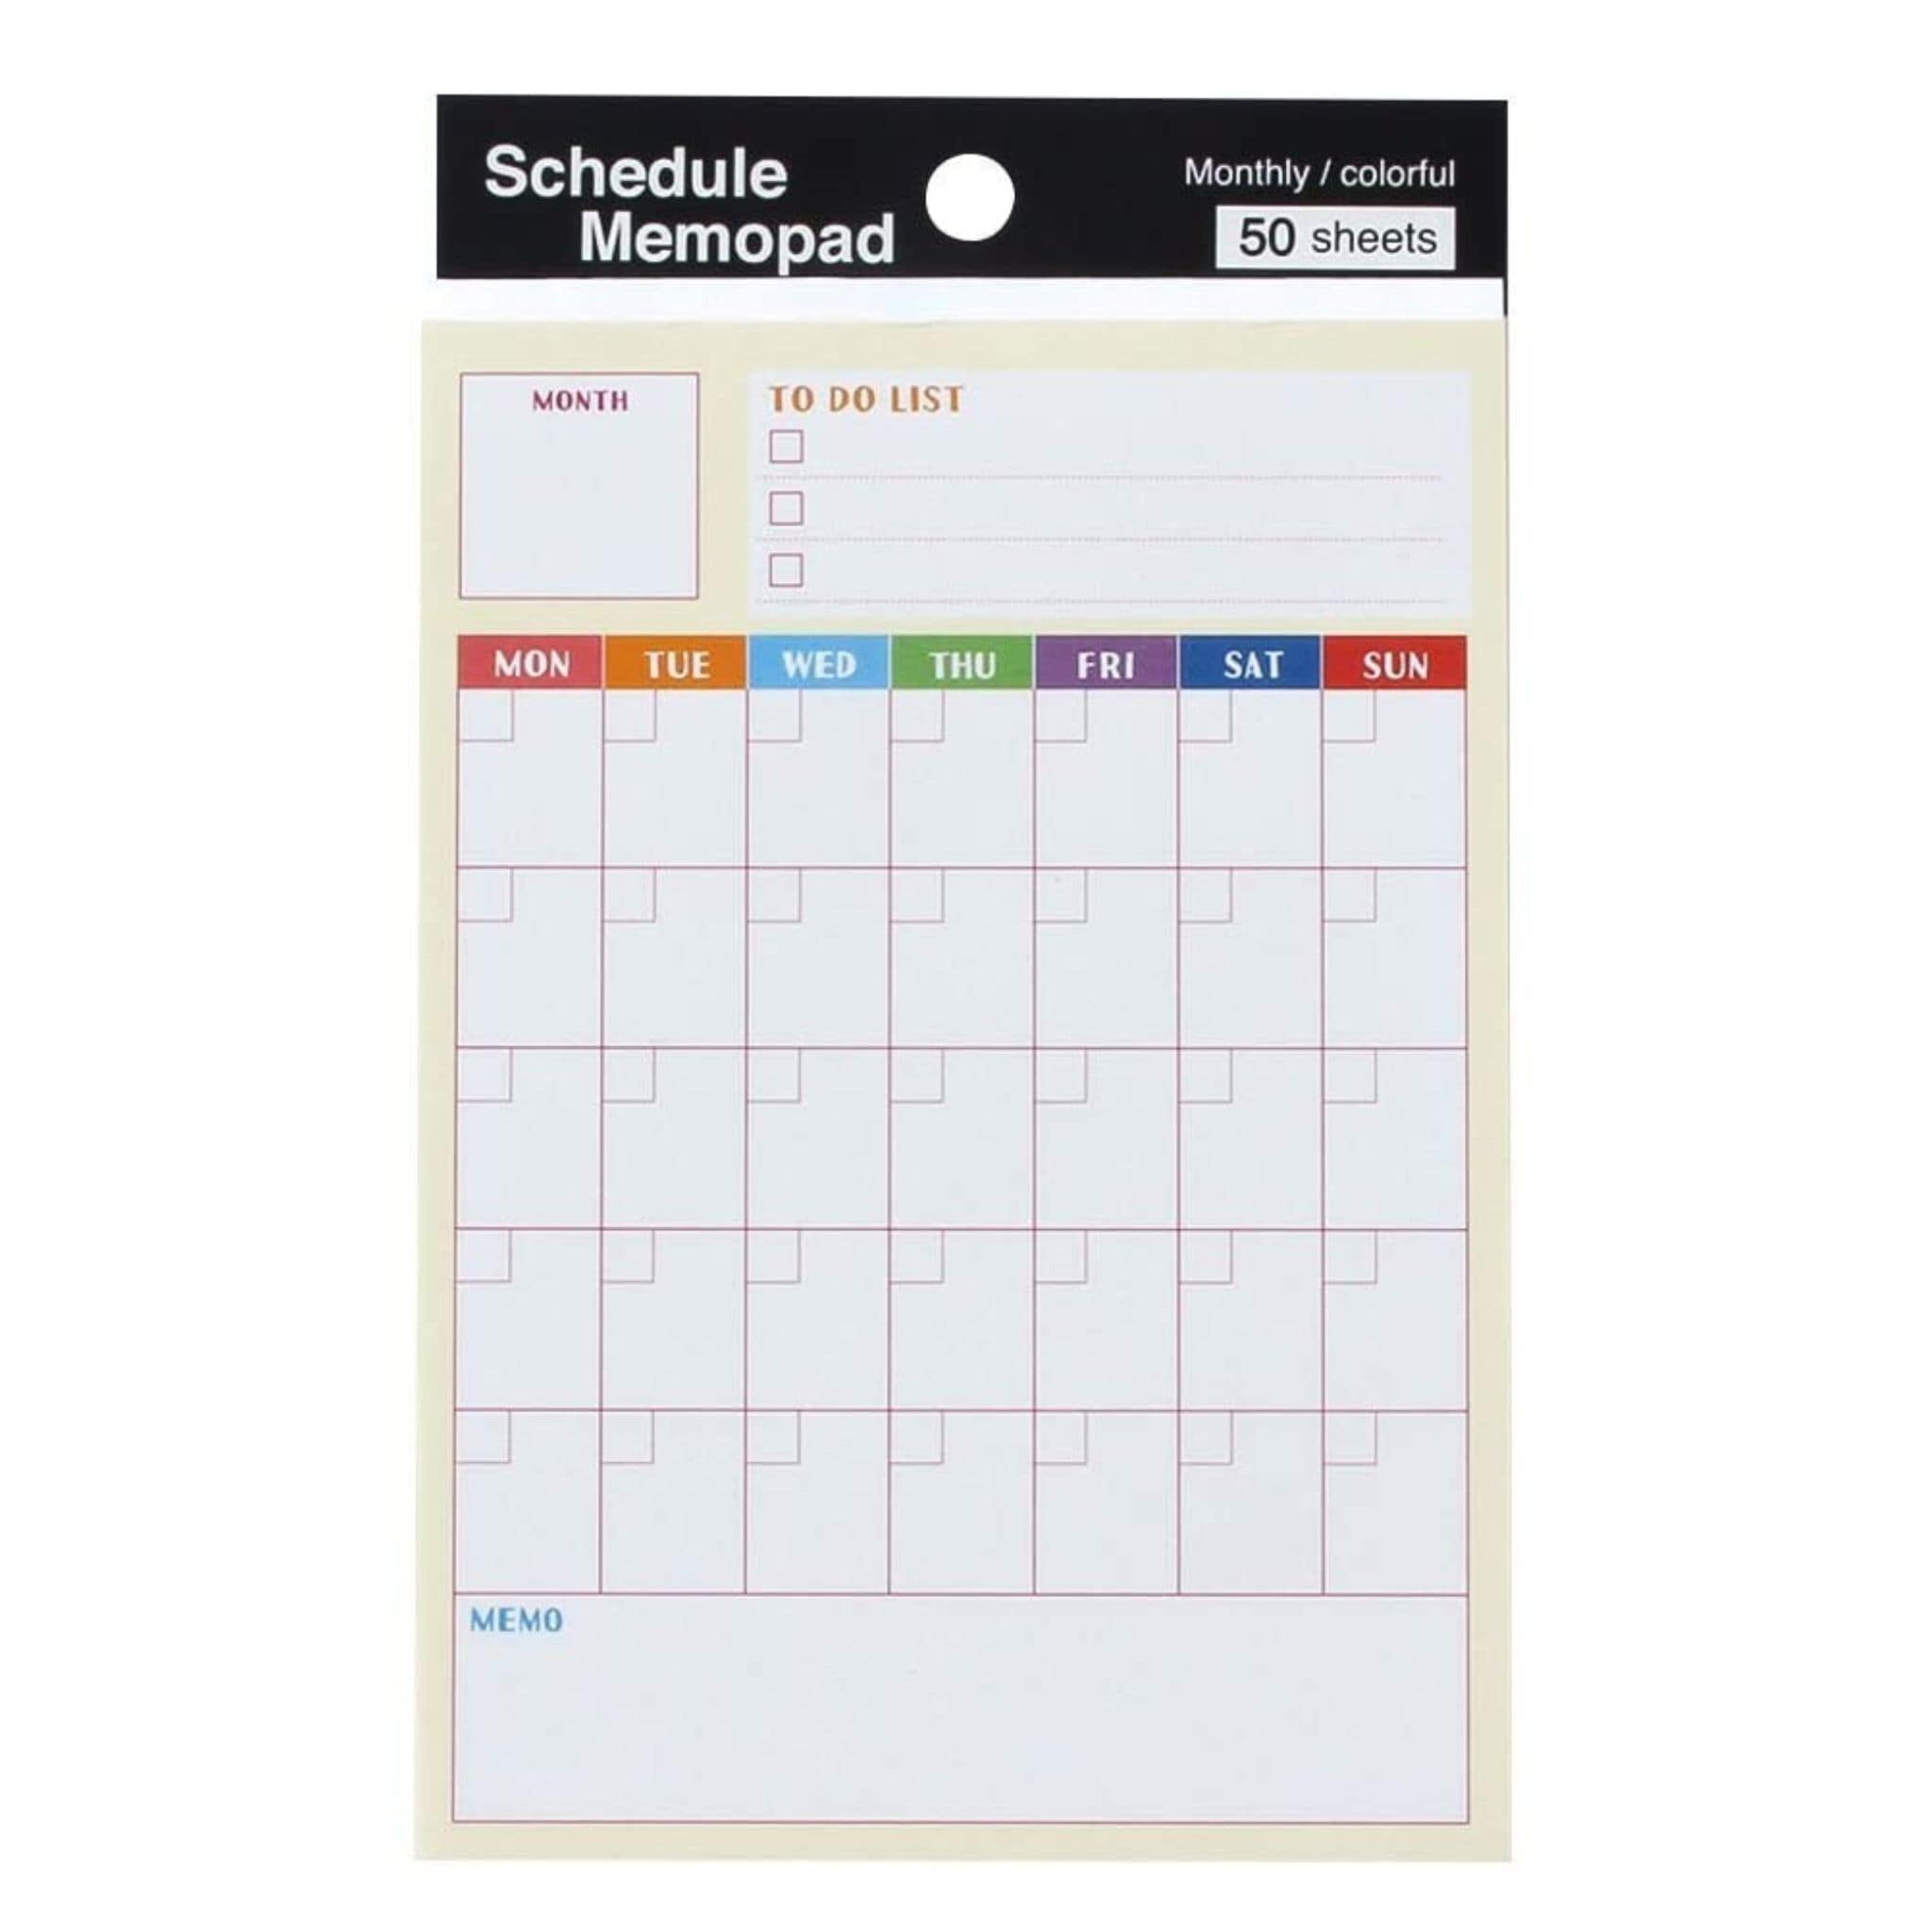 Pine Book A6 Colourful Monthly Schedule Memo Pad - Paper Kooka Stationery